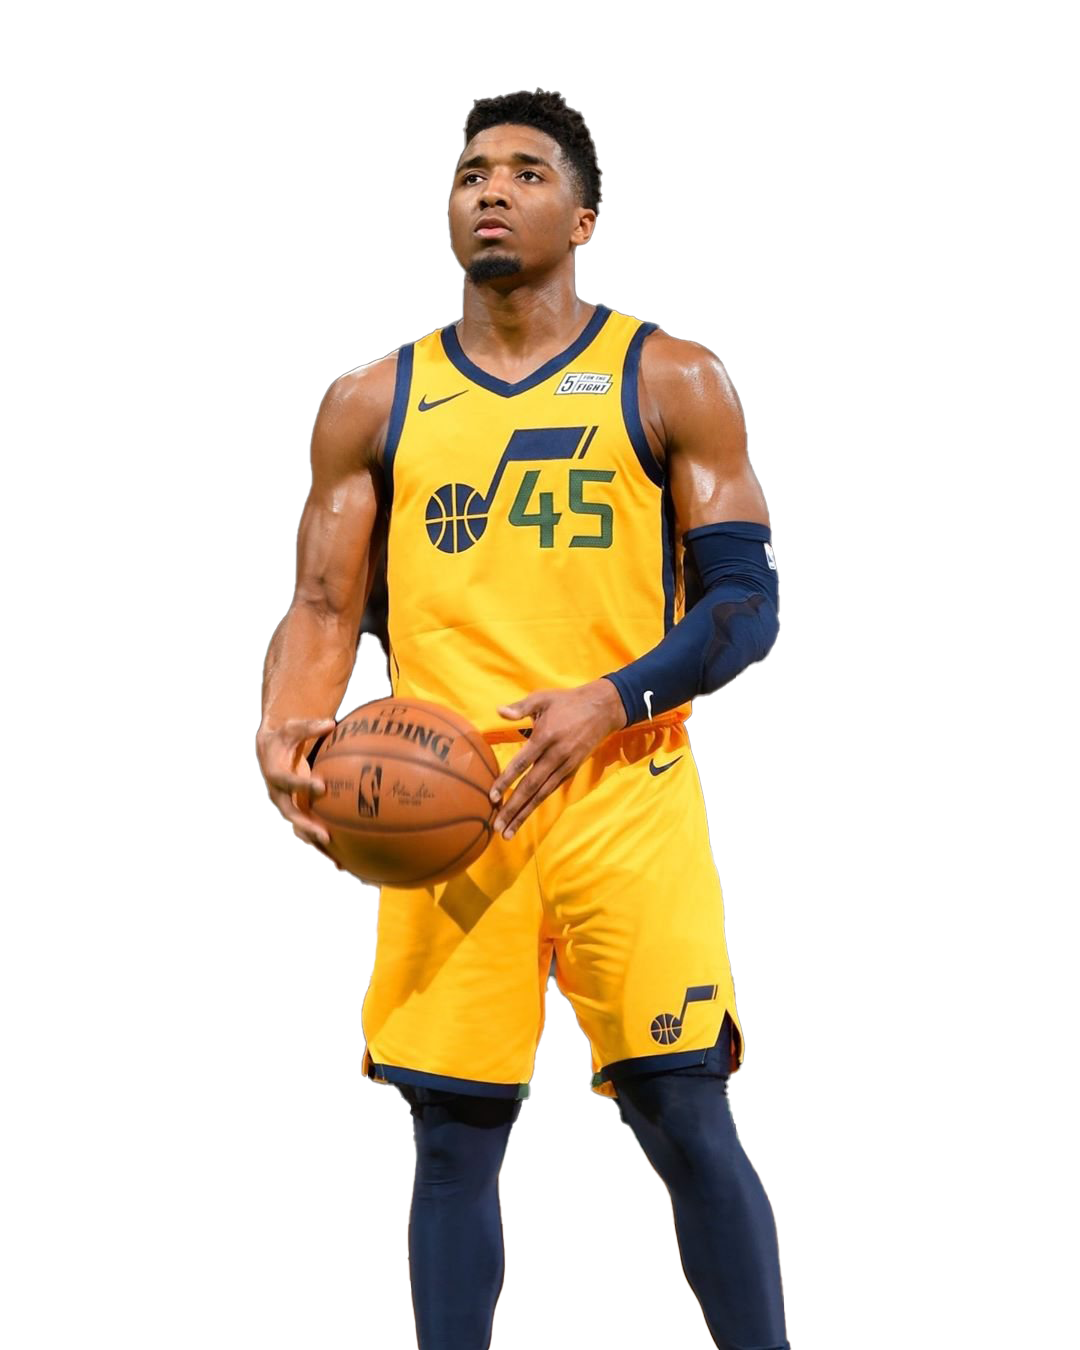 Donovan Mitchell PNG Free Download